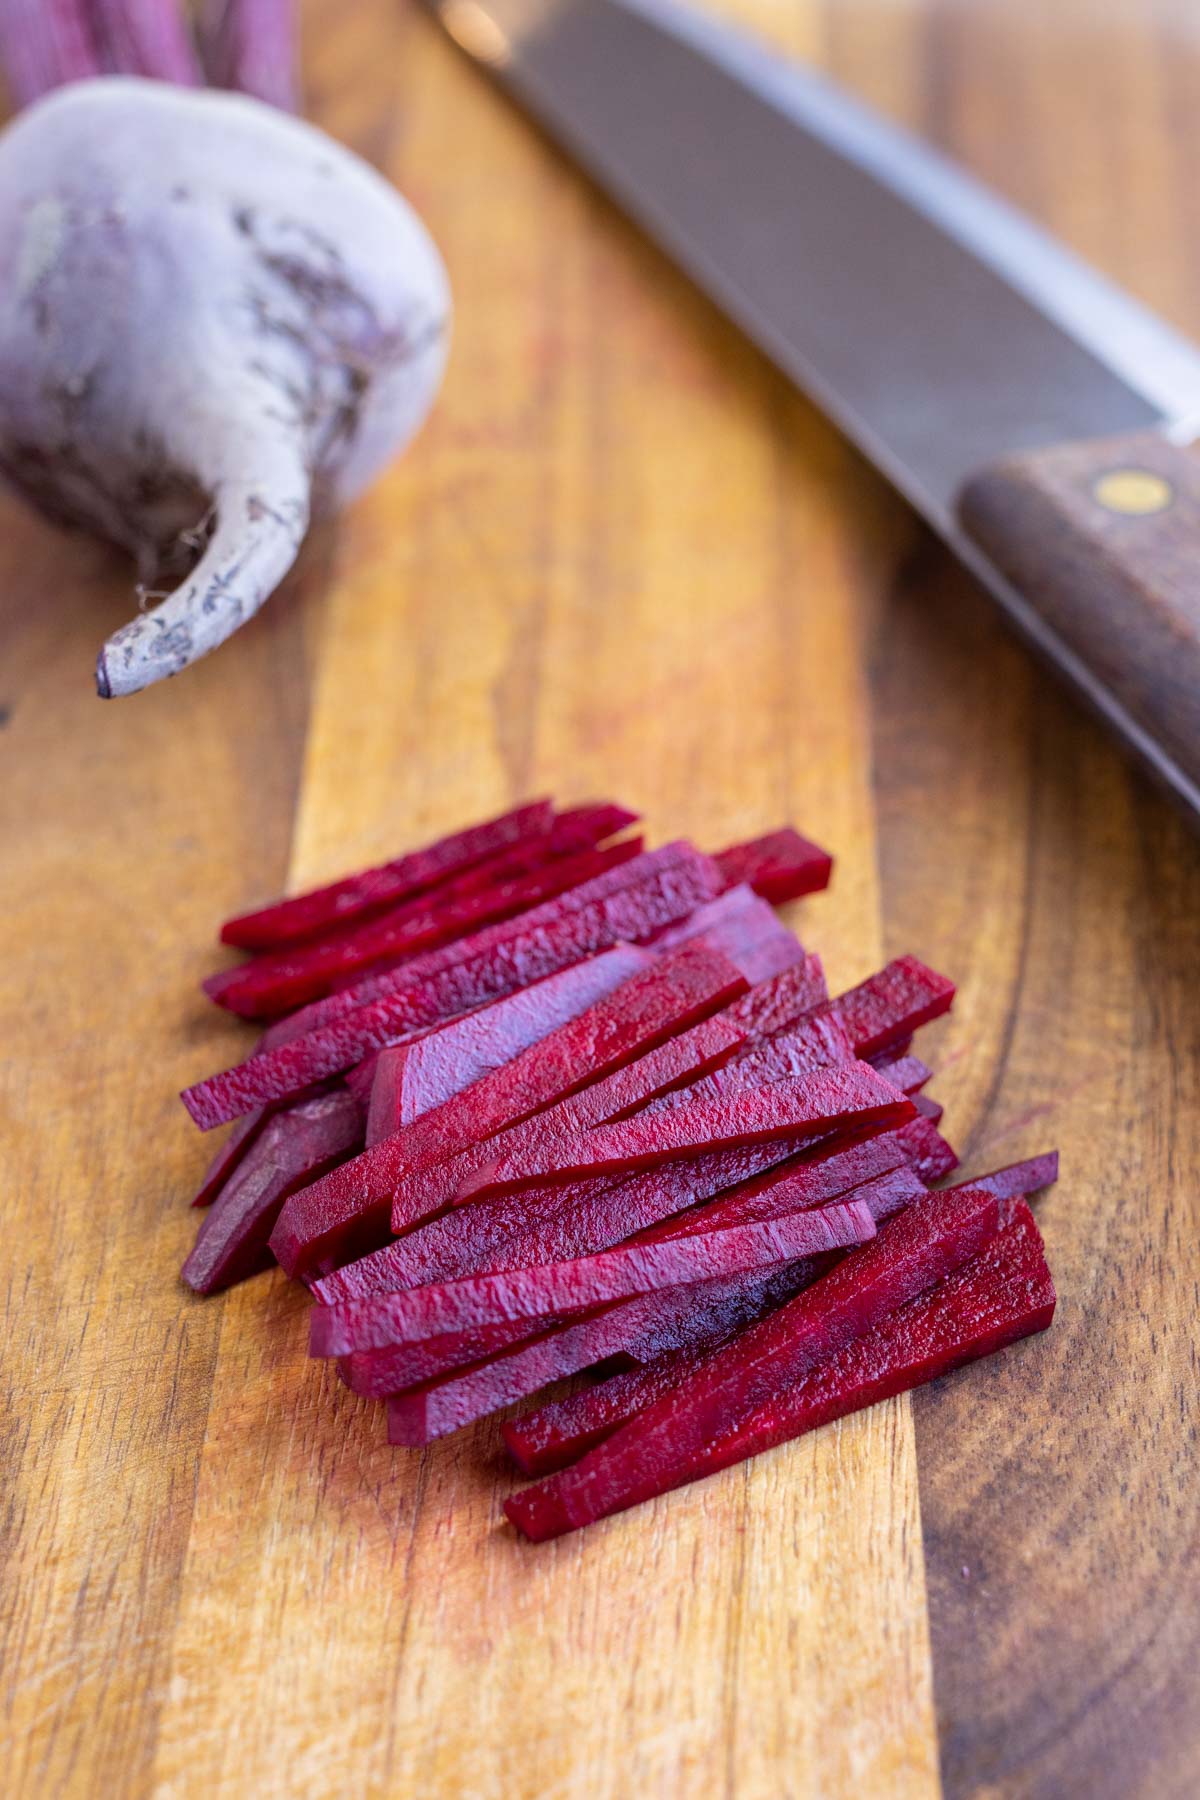 A pile of thinly cut beets is shown on the counter.